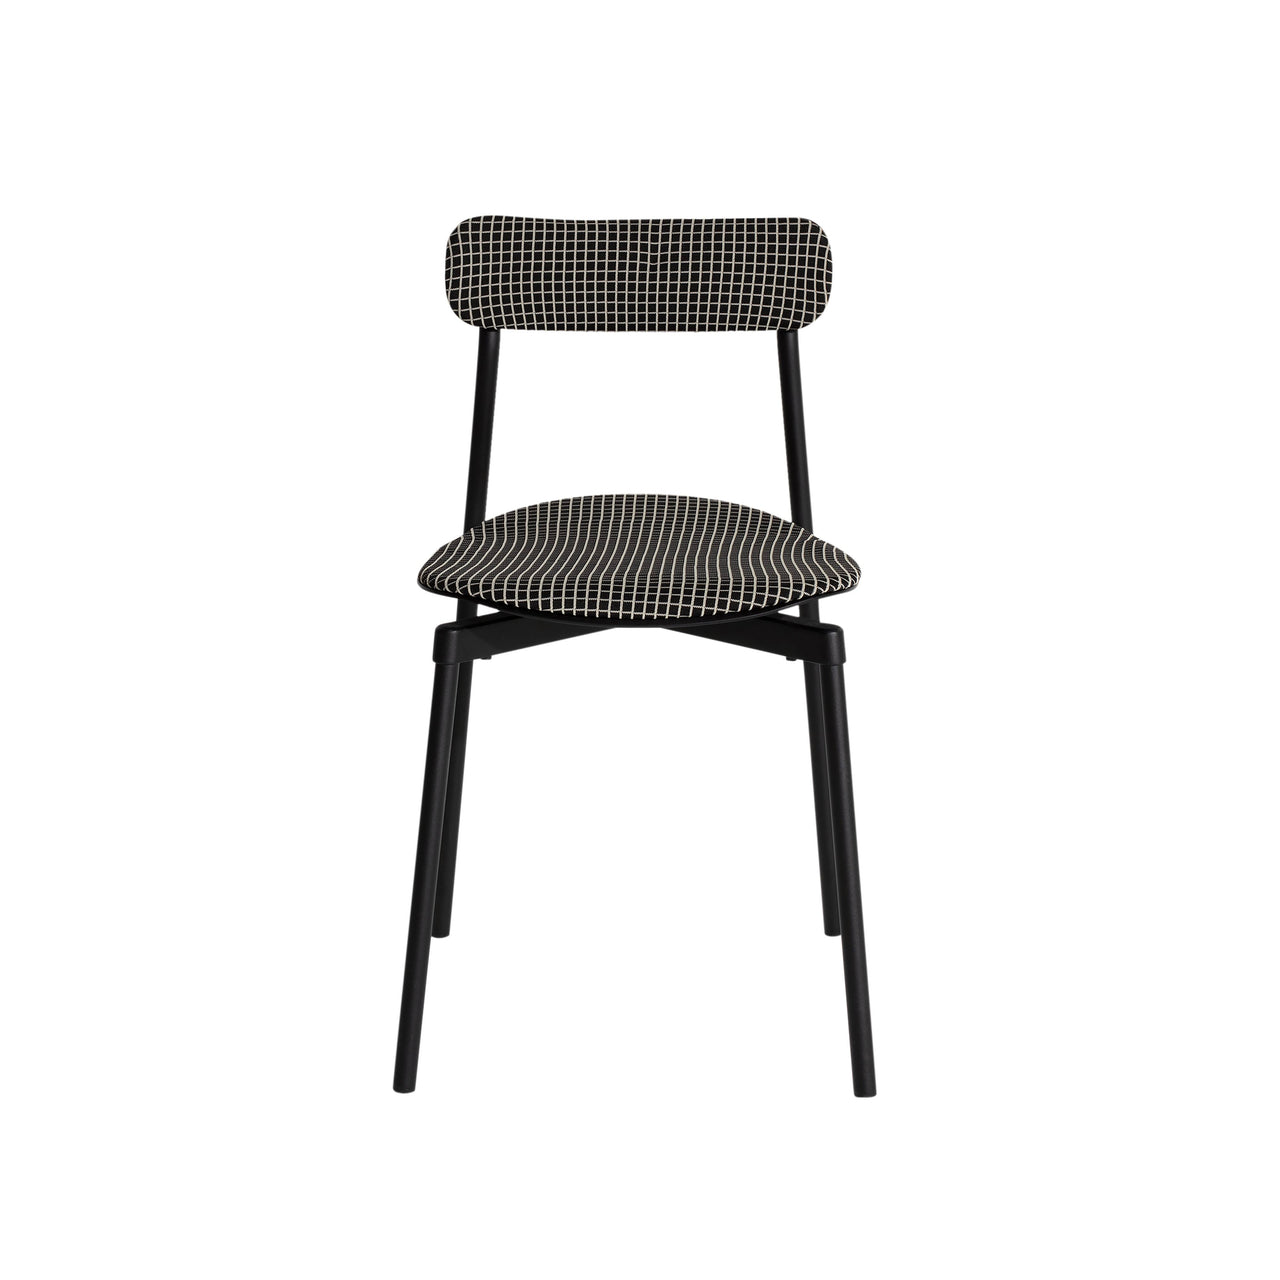 Fromme Soft Chair: Black + Offwhite Line